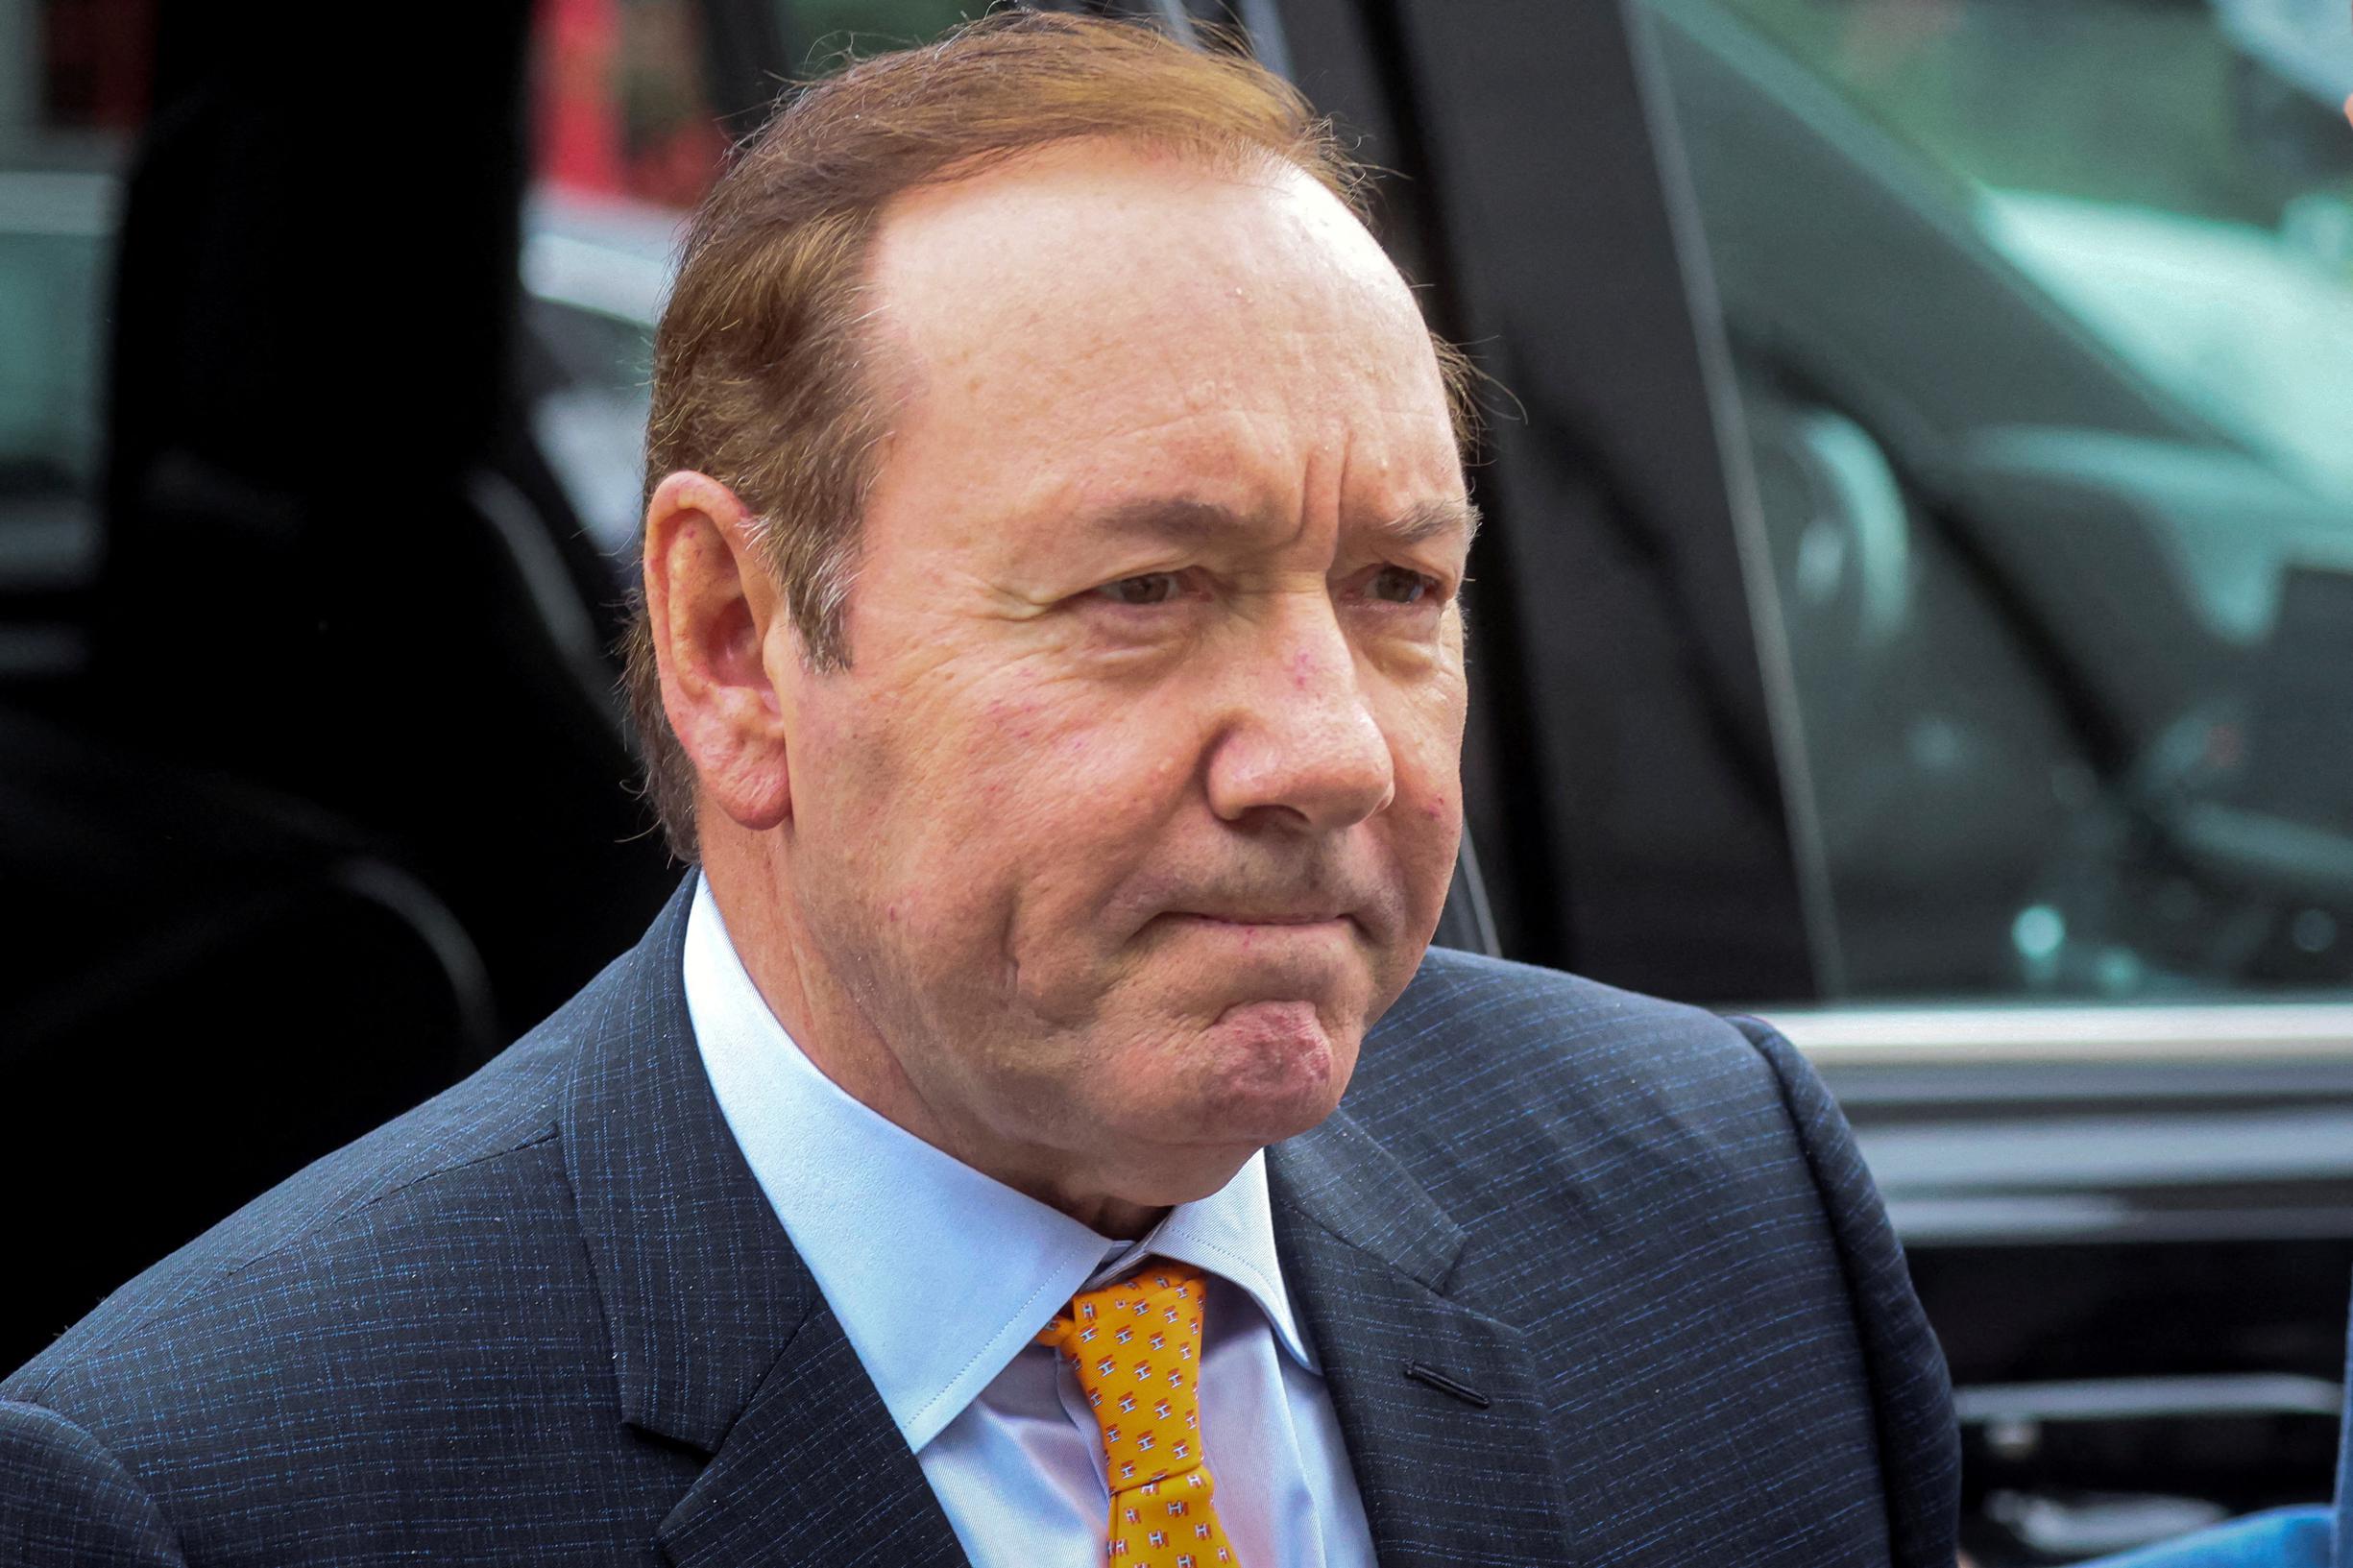 Nuove accuse contro Kevin Spacey